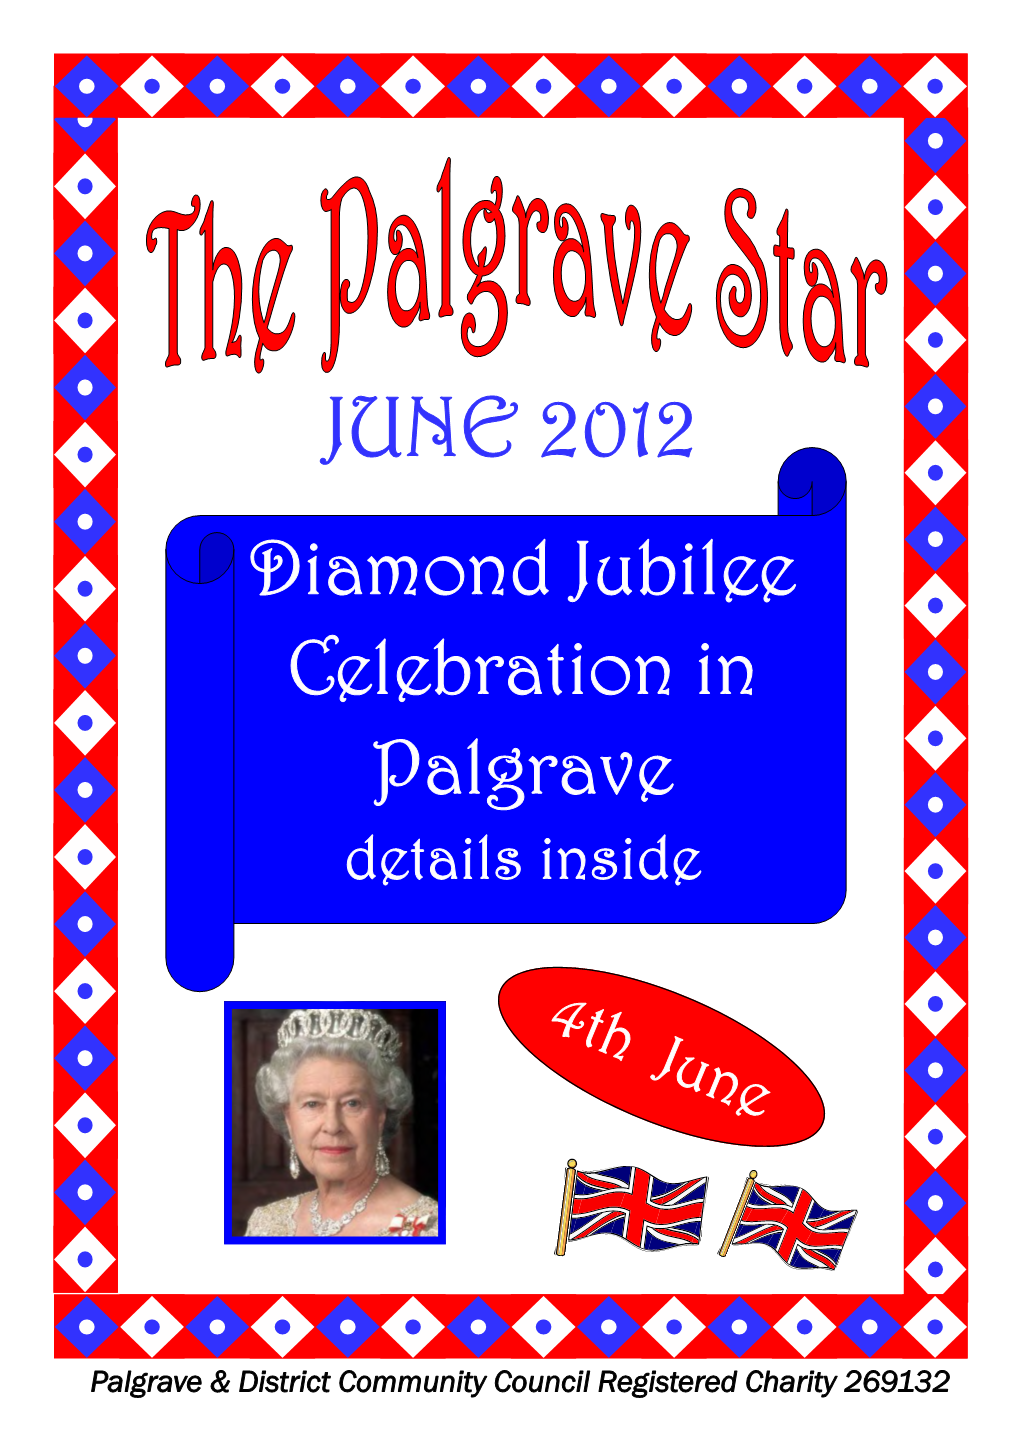 PALGRAVE STAR COVER JUBILLEE.Pub